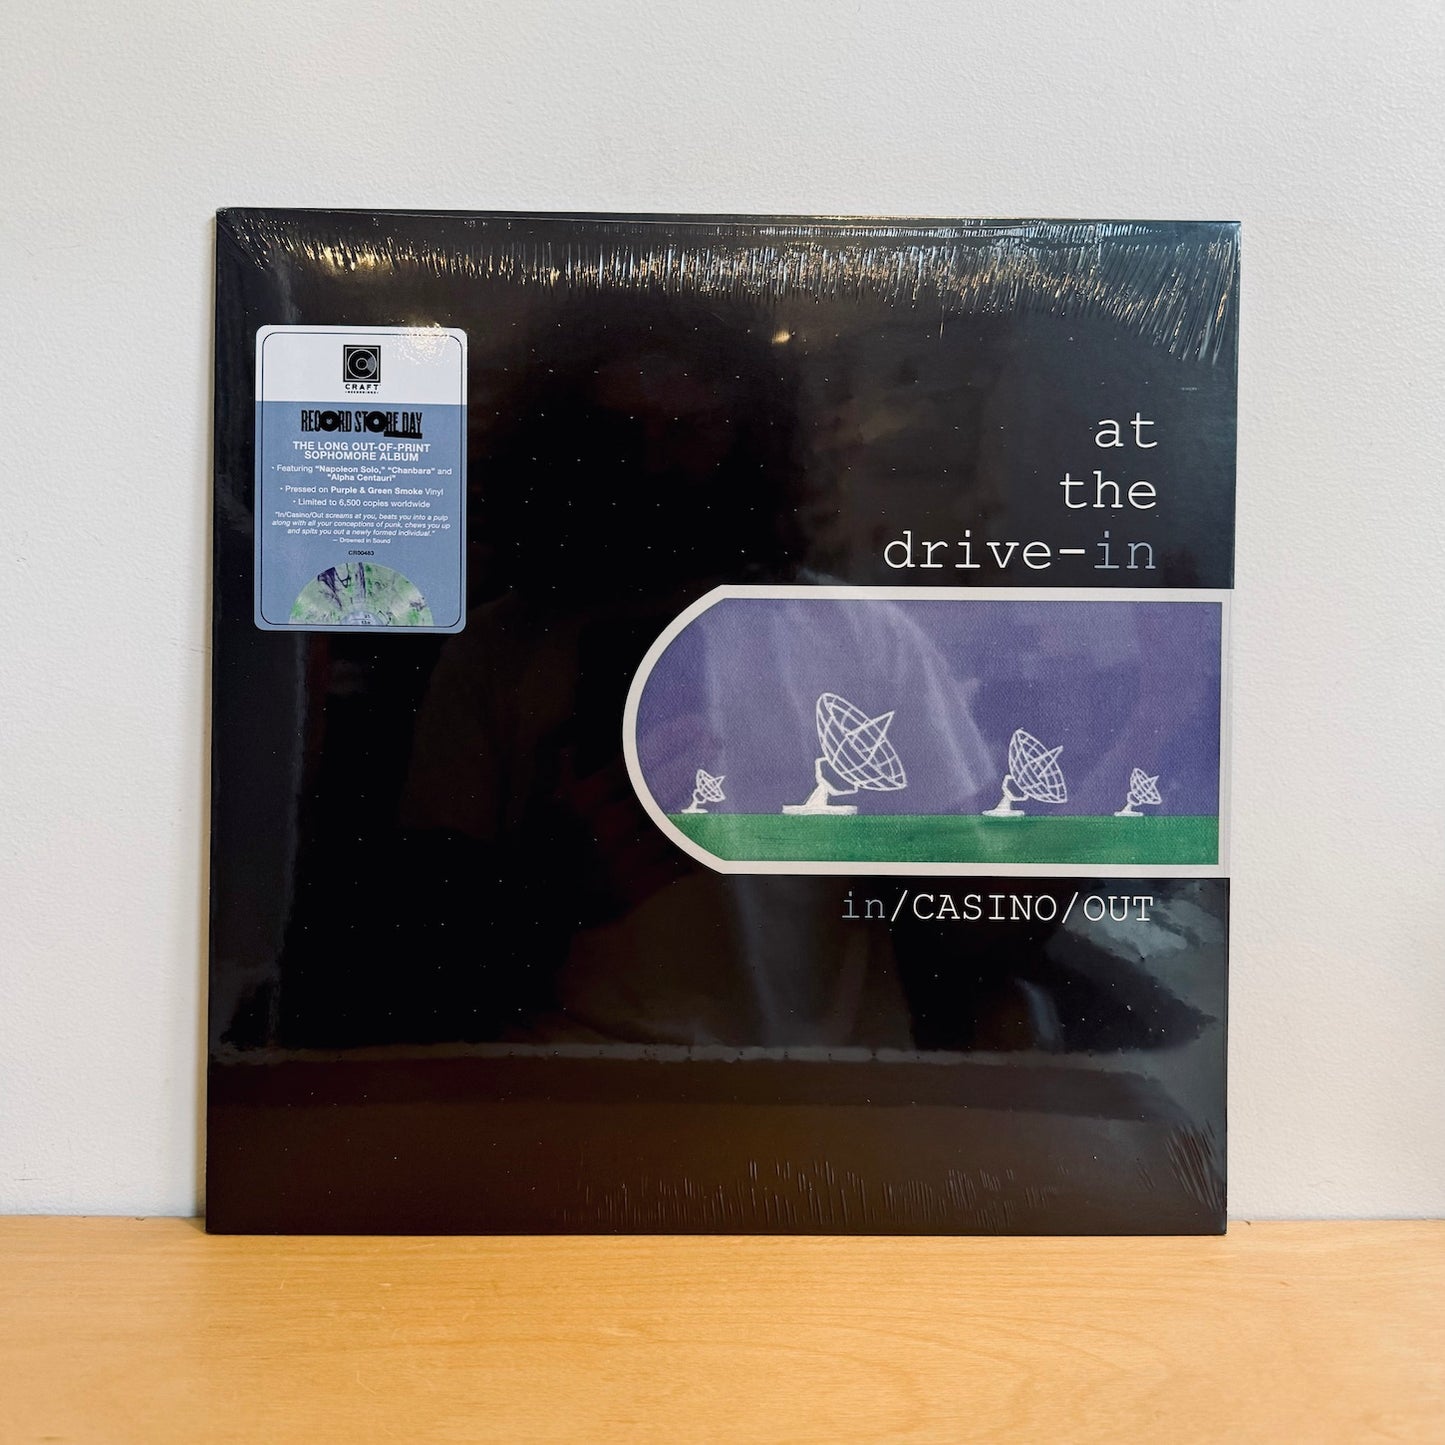 RSD2024 - AT THE DRIVE-IN - IN/CASINO/OUT. LP [Ltd. Ed. Purple & Green Smoke Vinyl / Edition of 3500]